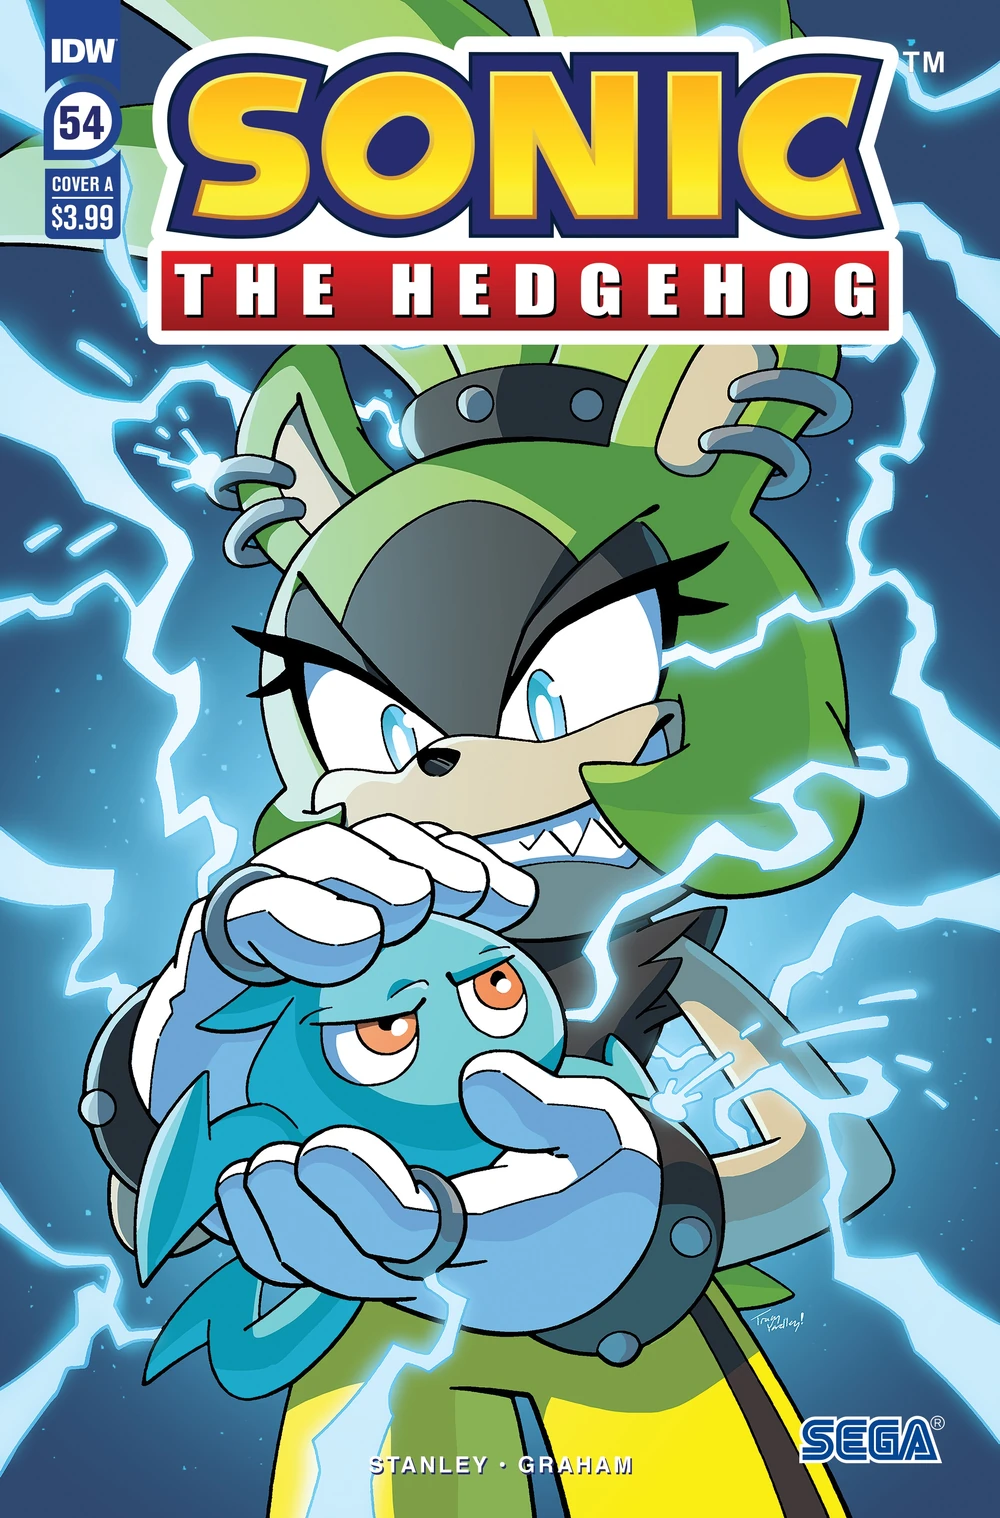 Sonic The Hedgehog #54 Cover A